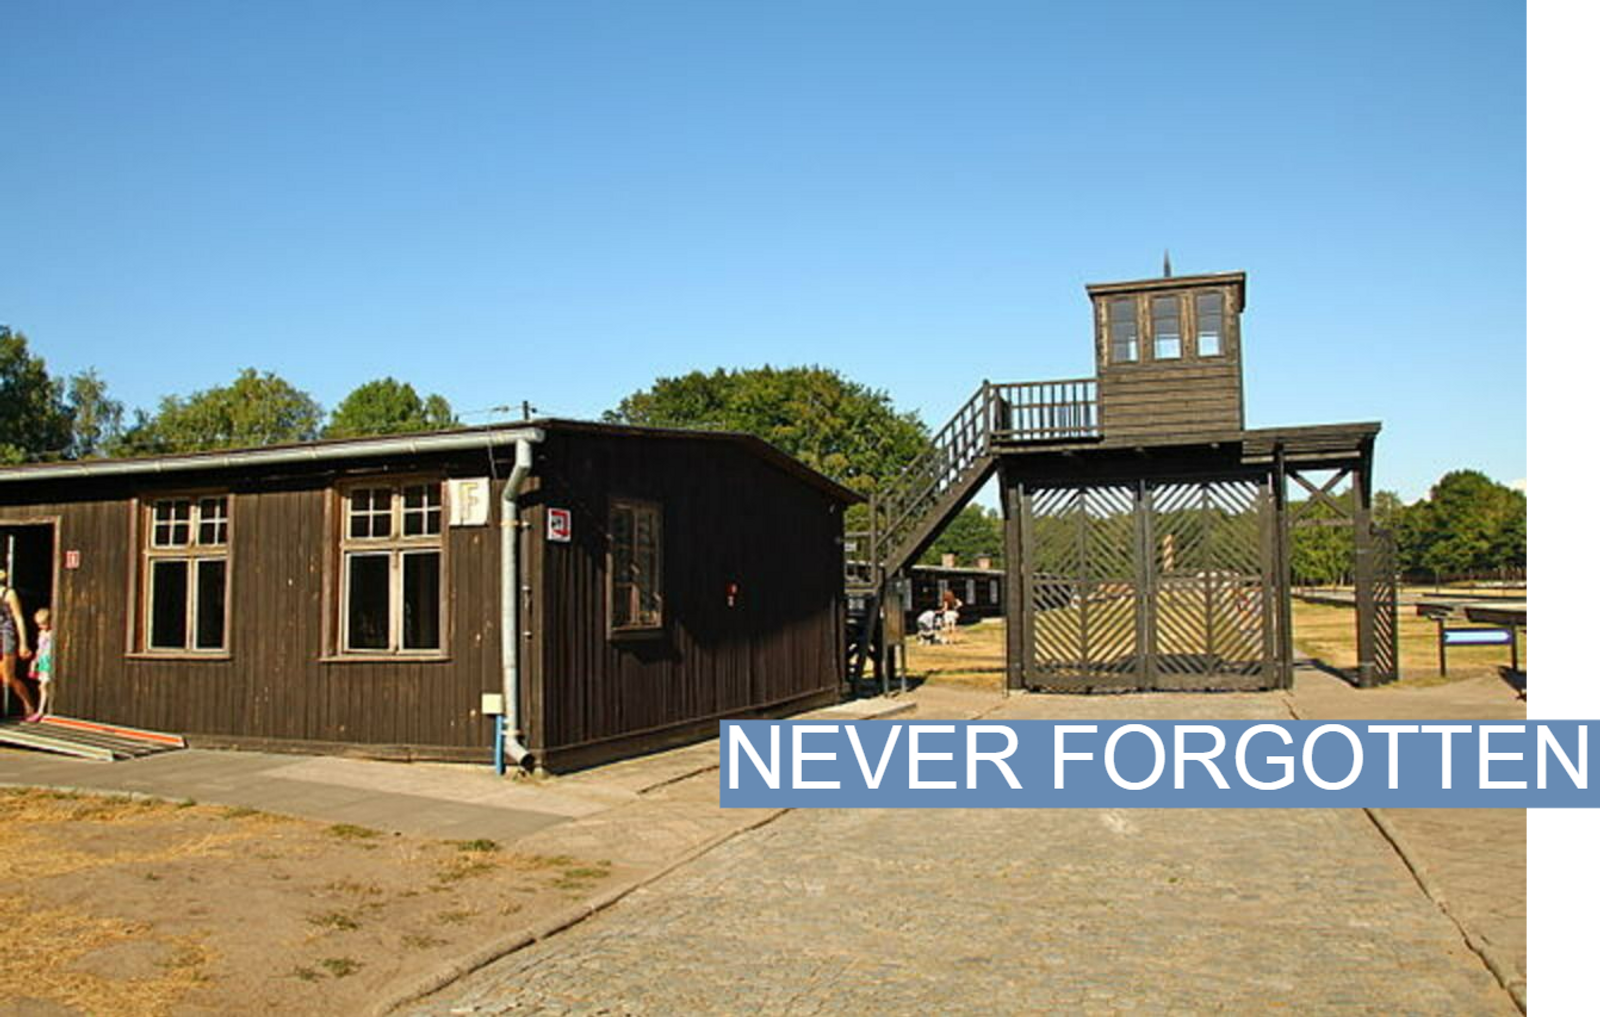 Stutthof memorial and former concentration camp